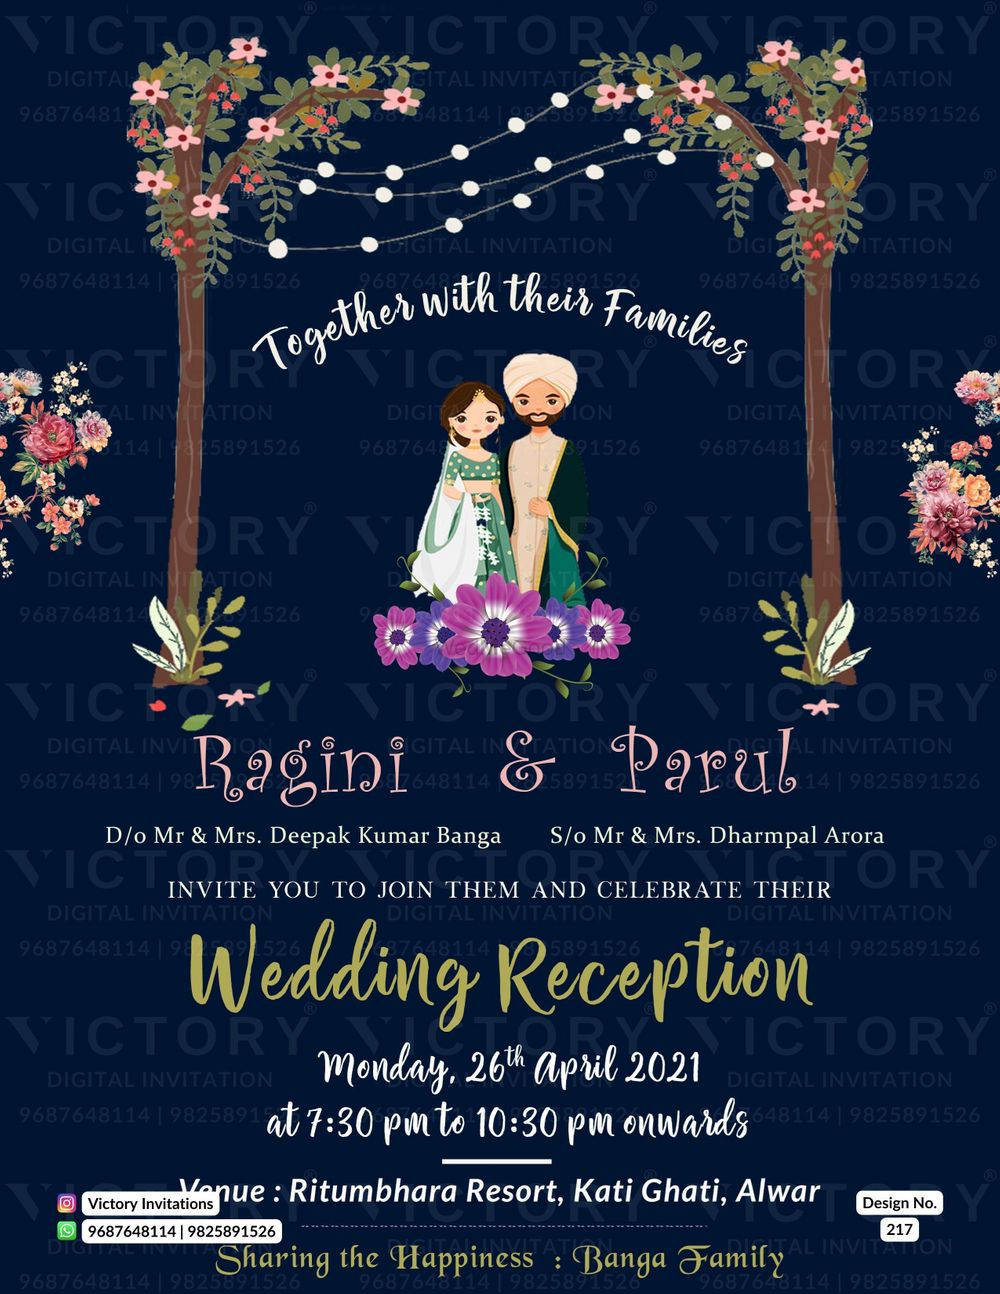 Photo From Punjabi Wedding - By Victory Invitations